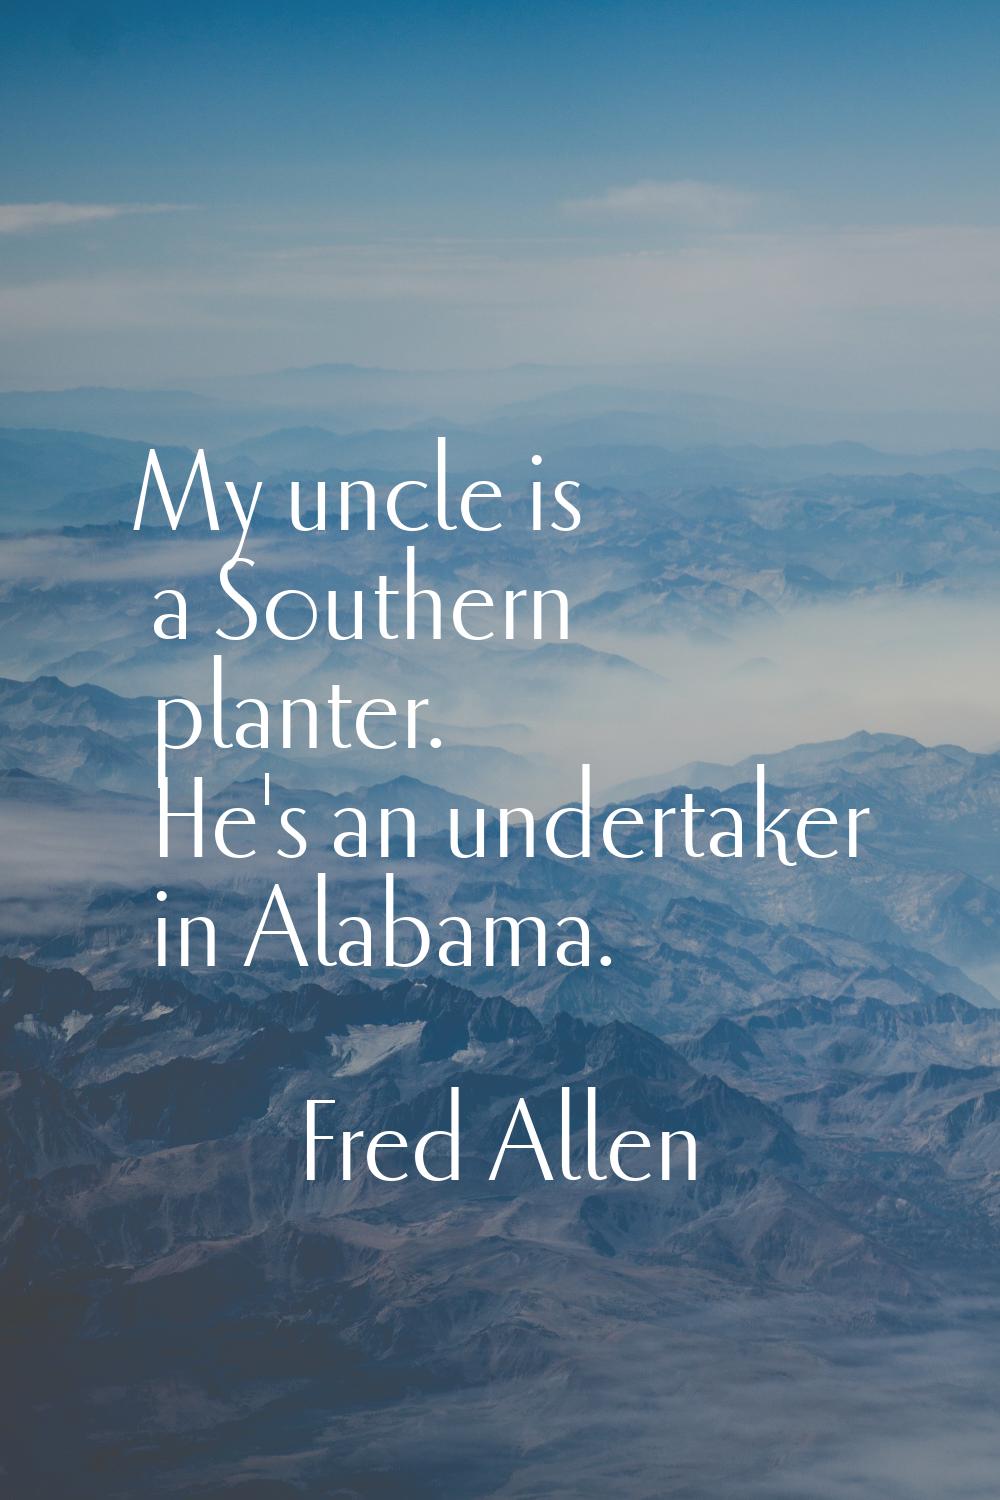 My uncle is a Southern planter. He's an undertaker in Alabama.